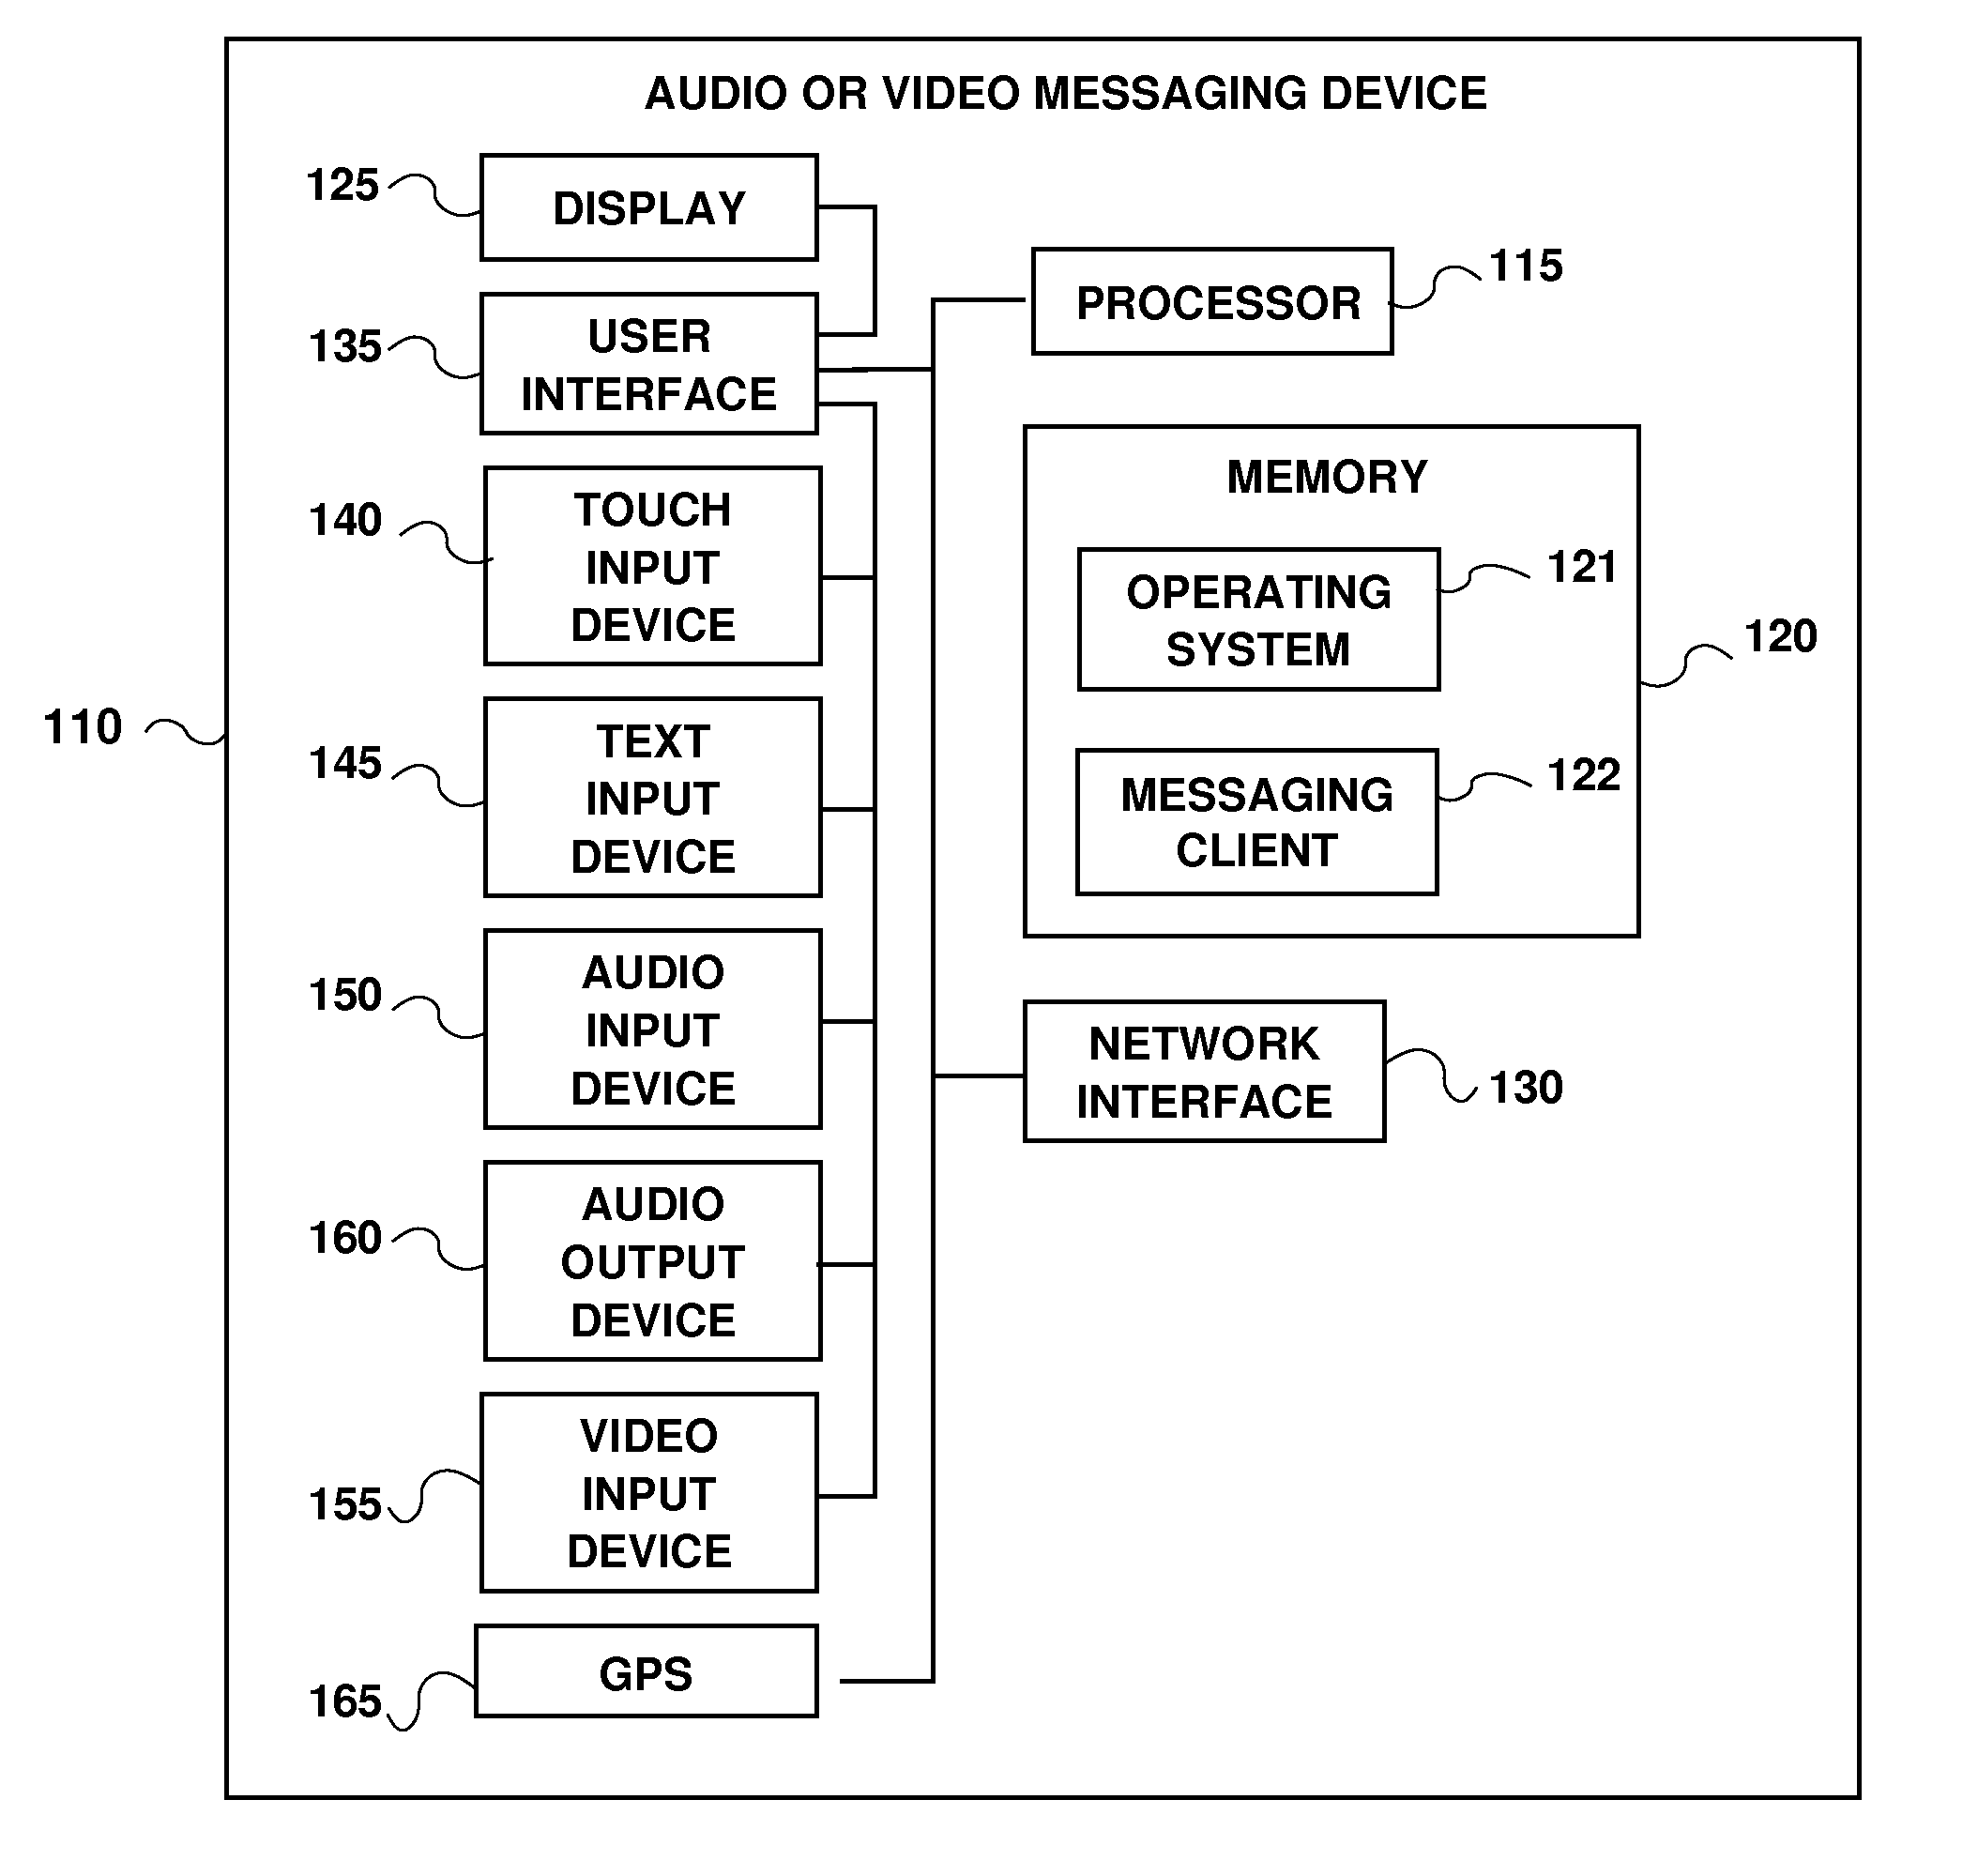 System and Method for Remotely Directed Filtering and Sorting of Near Real-Time Audio or Video Messages